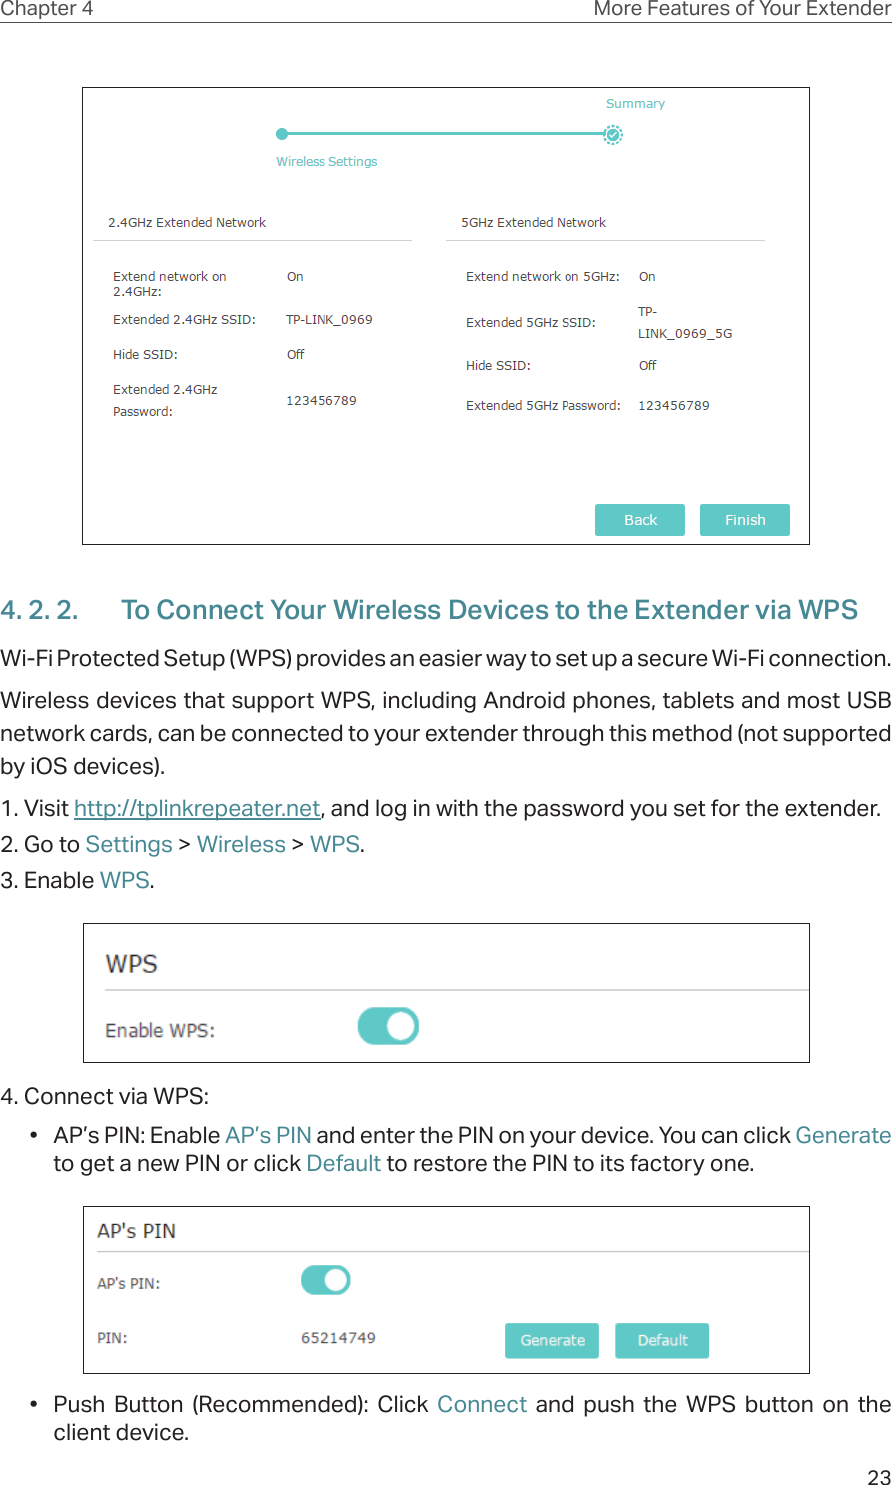 23Chapter 4 More Features of Your Extender4. 2. 2.  To Connect Your Wireless Devices to the Extender via WPSWi-Fi Protected Setup (WPS) provides an easier way to set up a secure Wi-Fi connection.Wireless devices that support WPS, including Android phones, tablets and most USB network cards, can be connected to your extender through this method (not supported by iOS devices).1. Visit http://tplinkrepeater.net, and log in with the password you set for the extender.2. Go to Settings &gt; Wireless &gt; WPS. 3. Enable WPS.4. Connect via WPS:•  AP’s PIN: Enable AP’s PIN and enter the PIN on your device. You can click Generate to get a new PIN or click Default to restore the PIN to its factory one.•  Push Button (Recommended): Click Connect and push the WPS button on the client device.